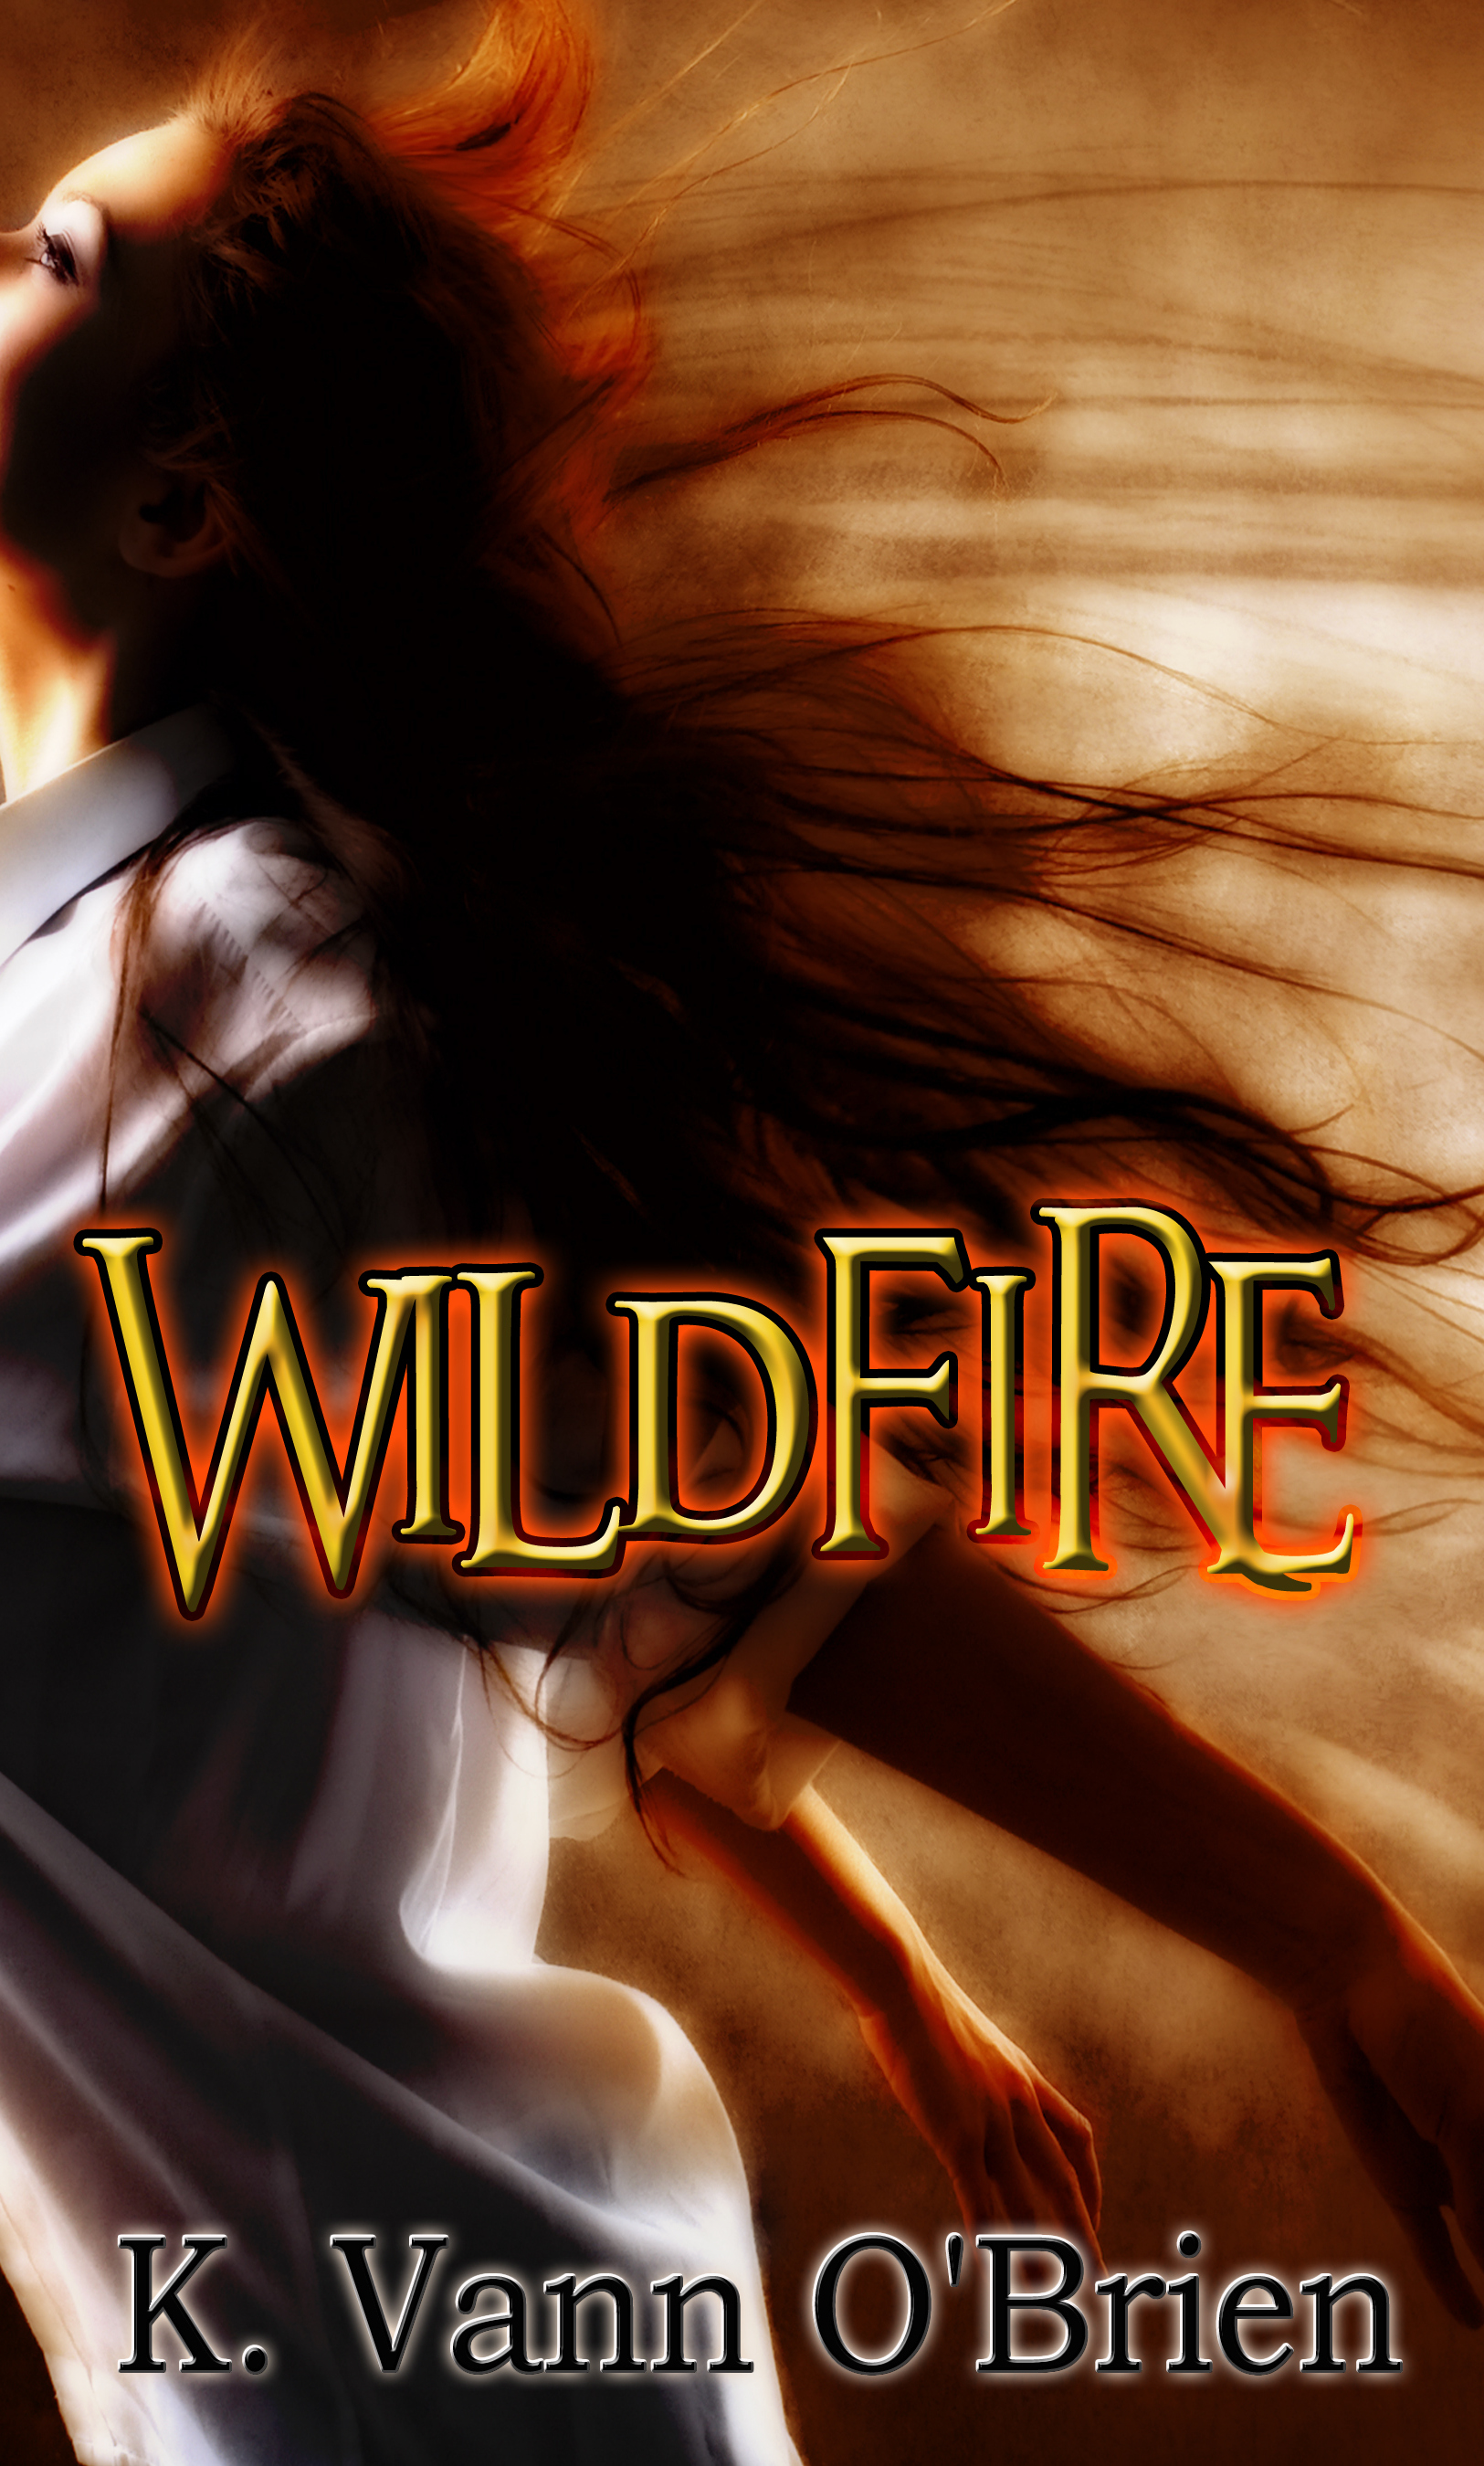 Wildfire cover final